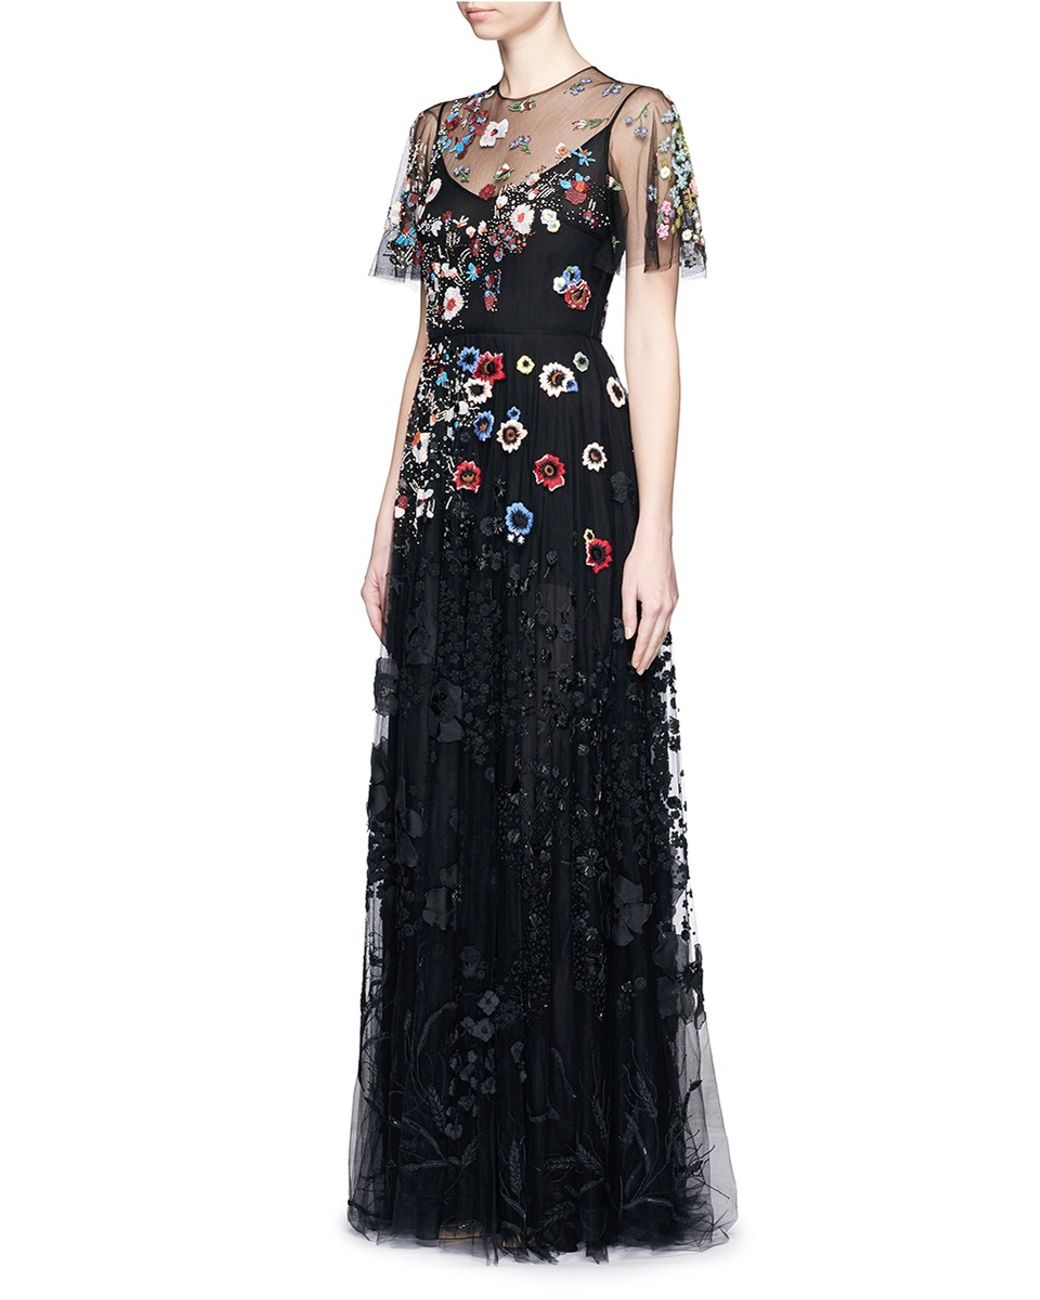 Valentino Floral Embroidery Bead Appliqué Tulle Gown in Black